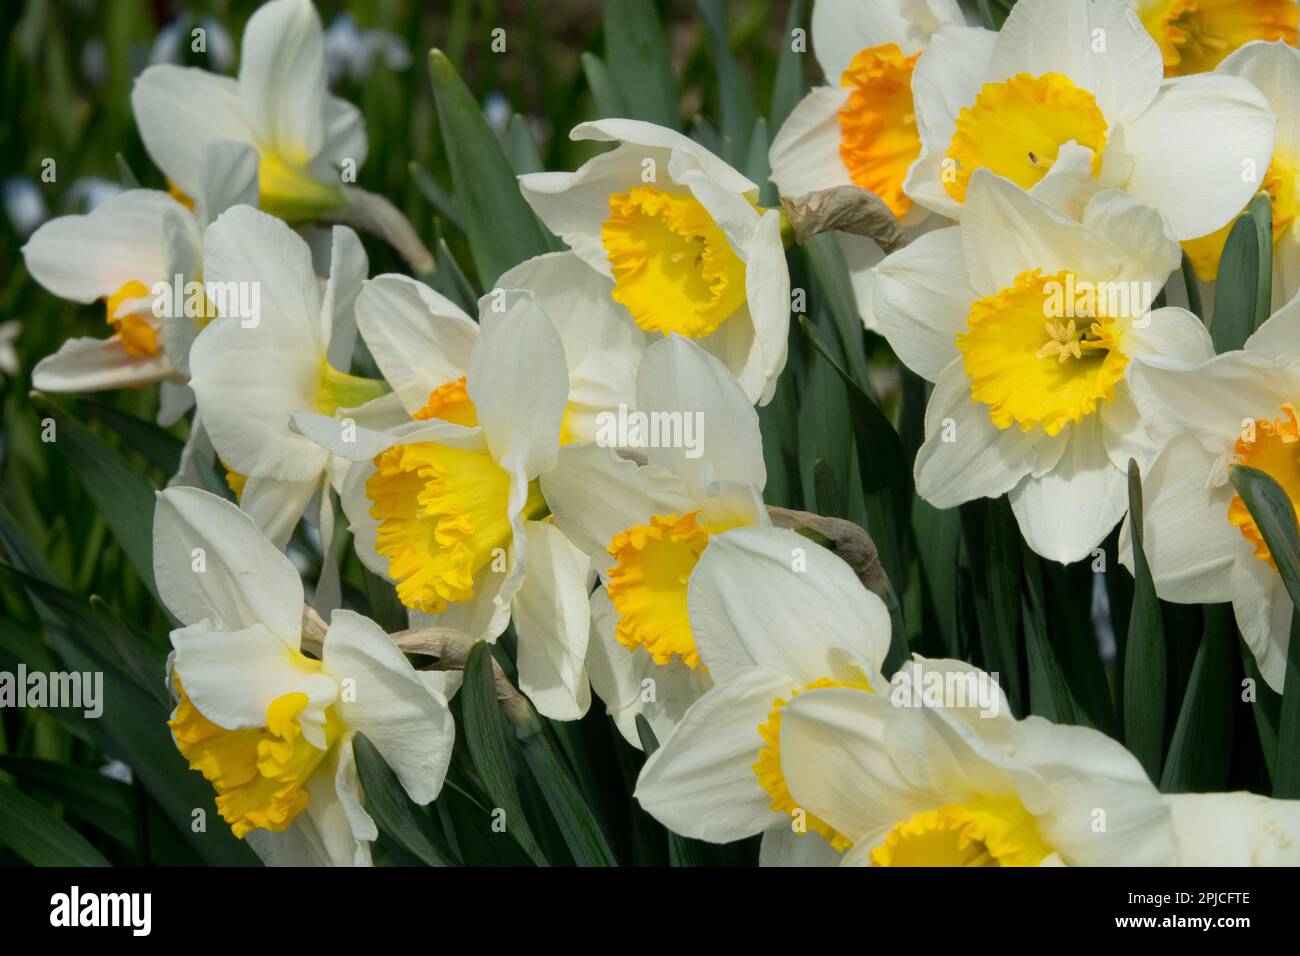 Daffodils, Narcissus '', Flowers, Spring, Garden, Narcissus, White, Yellow, Blooming, Plants Stock Photo